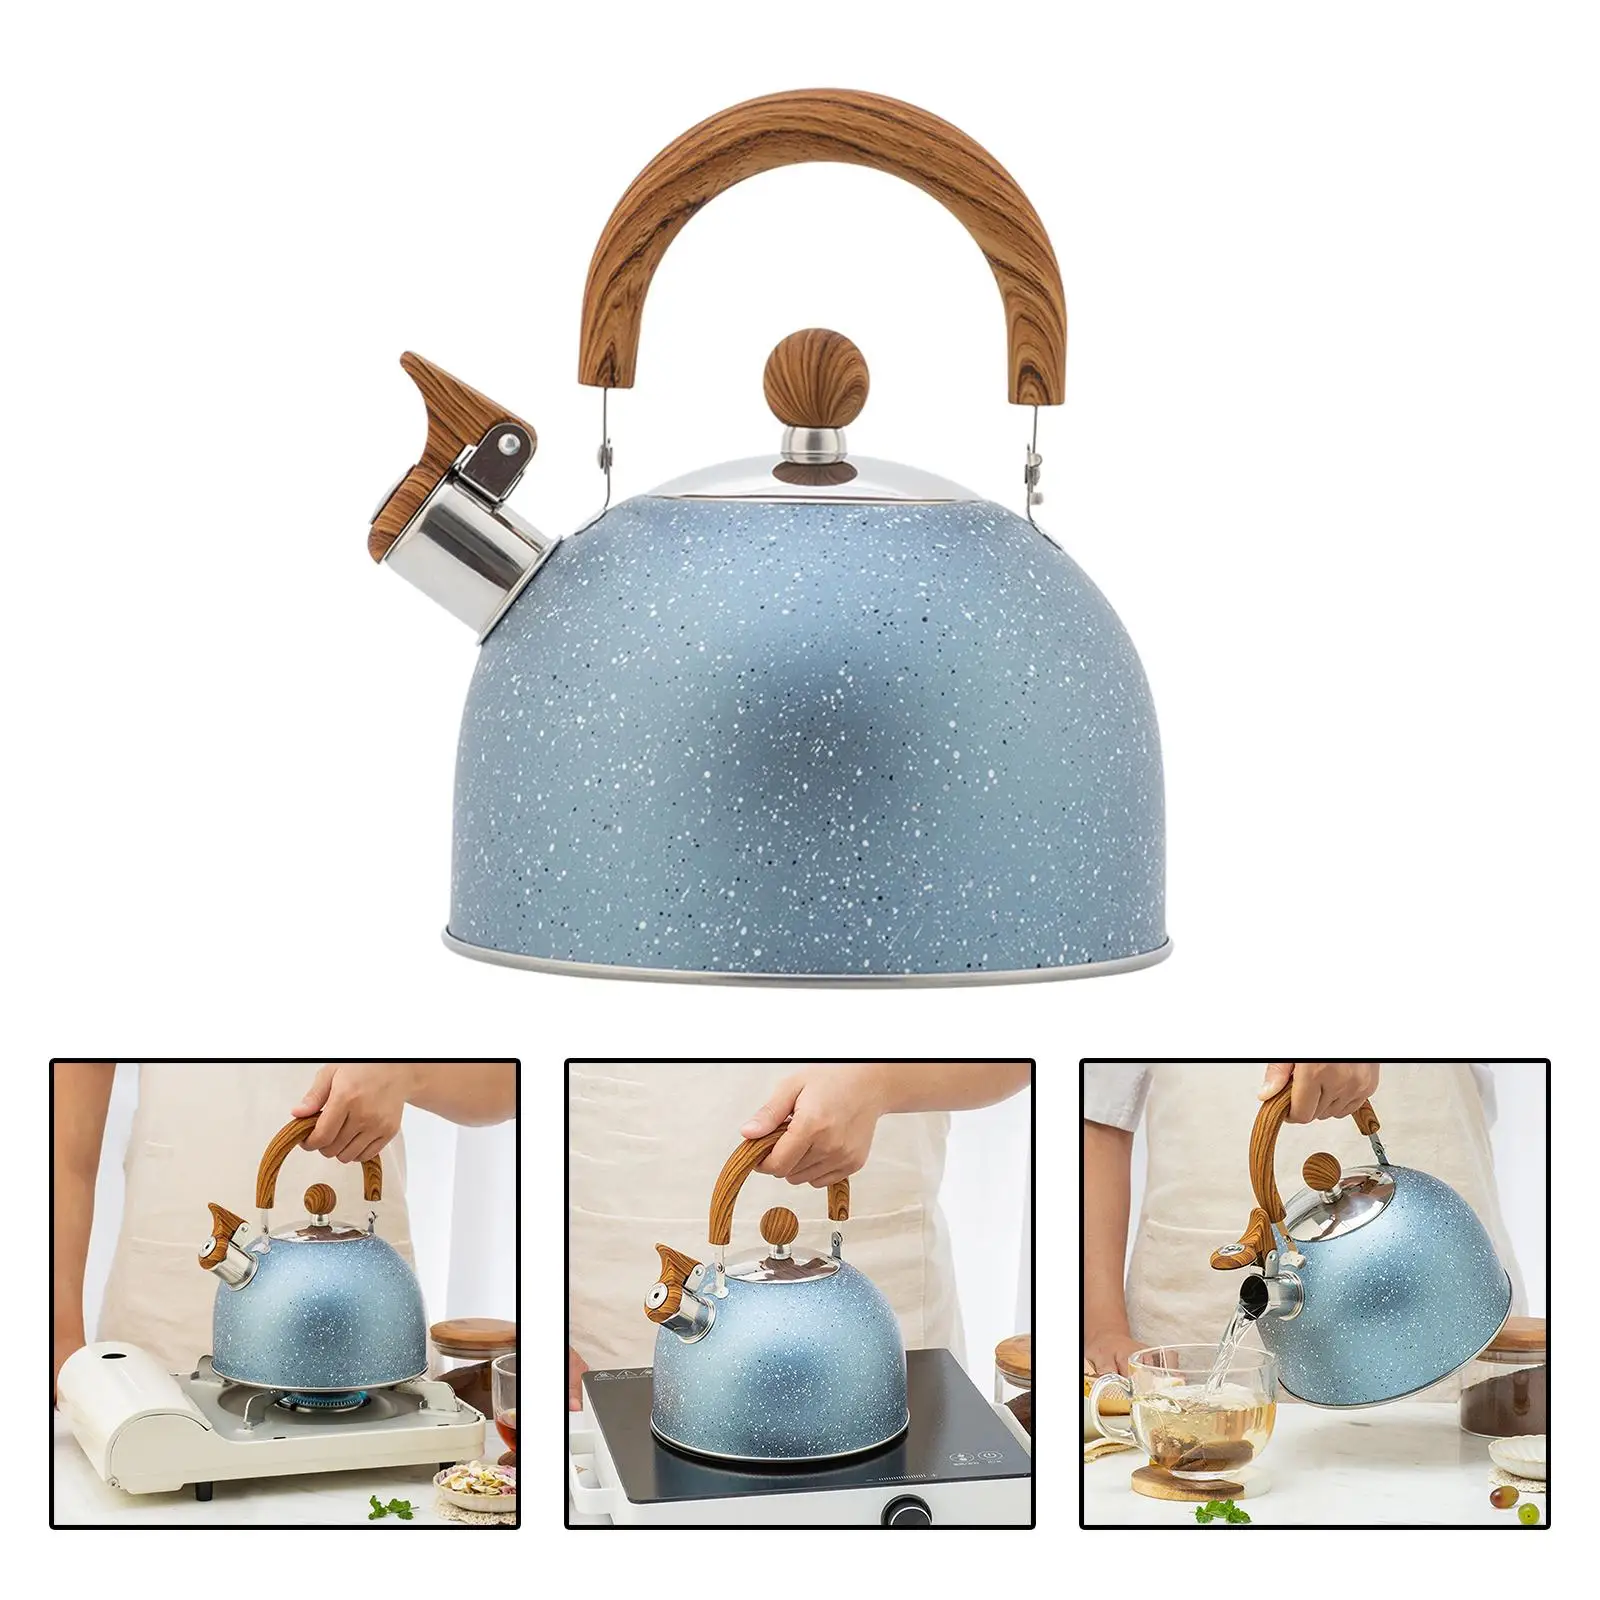 Portable Whistling Kettle with Wooden Handle Water Kettle 2.5L Large Capacity Teapot for Picnic Hiking Kitchen Camping Home